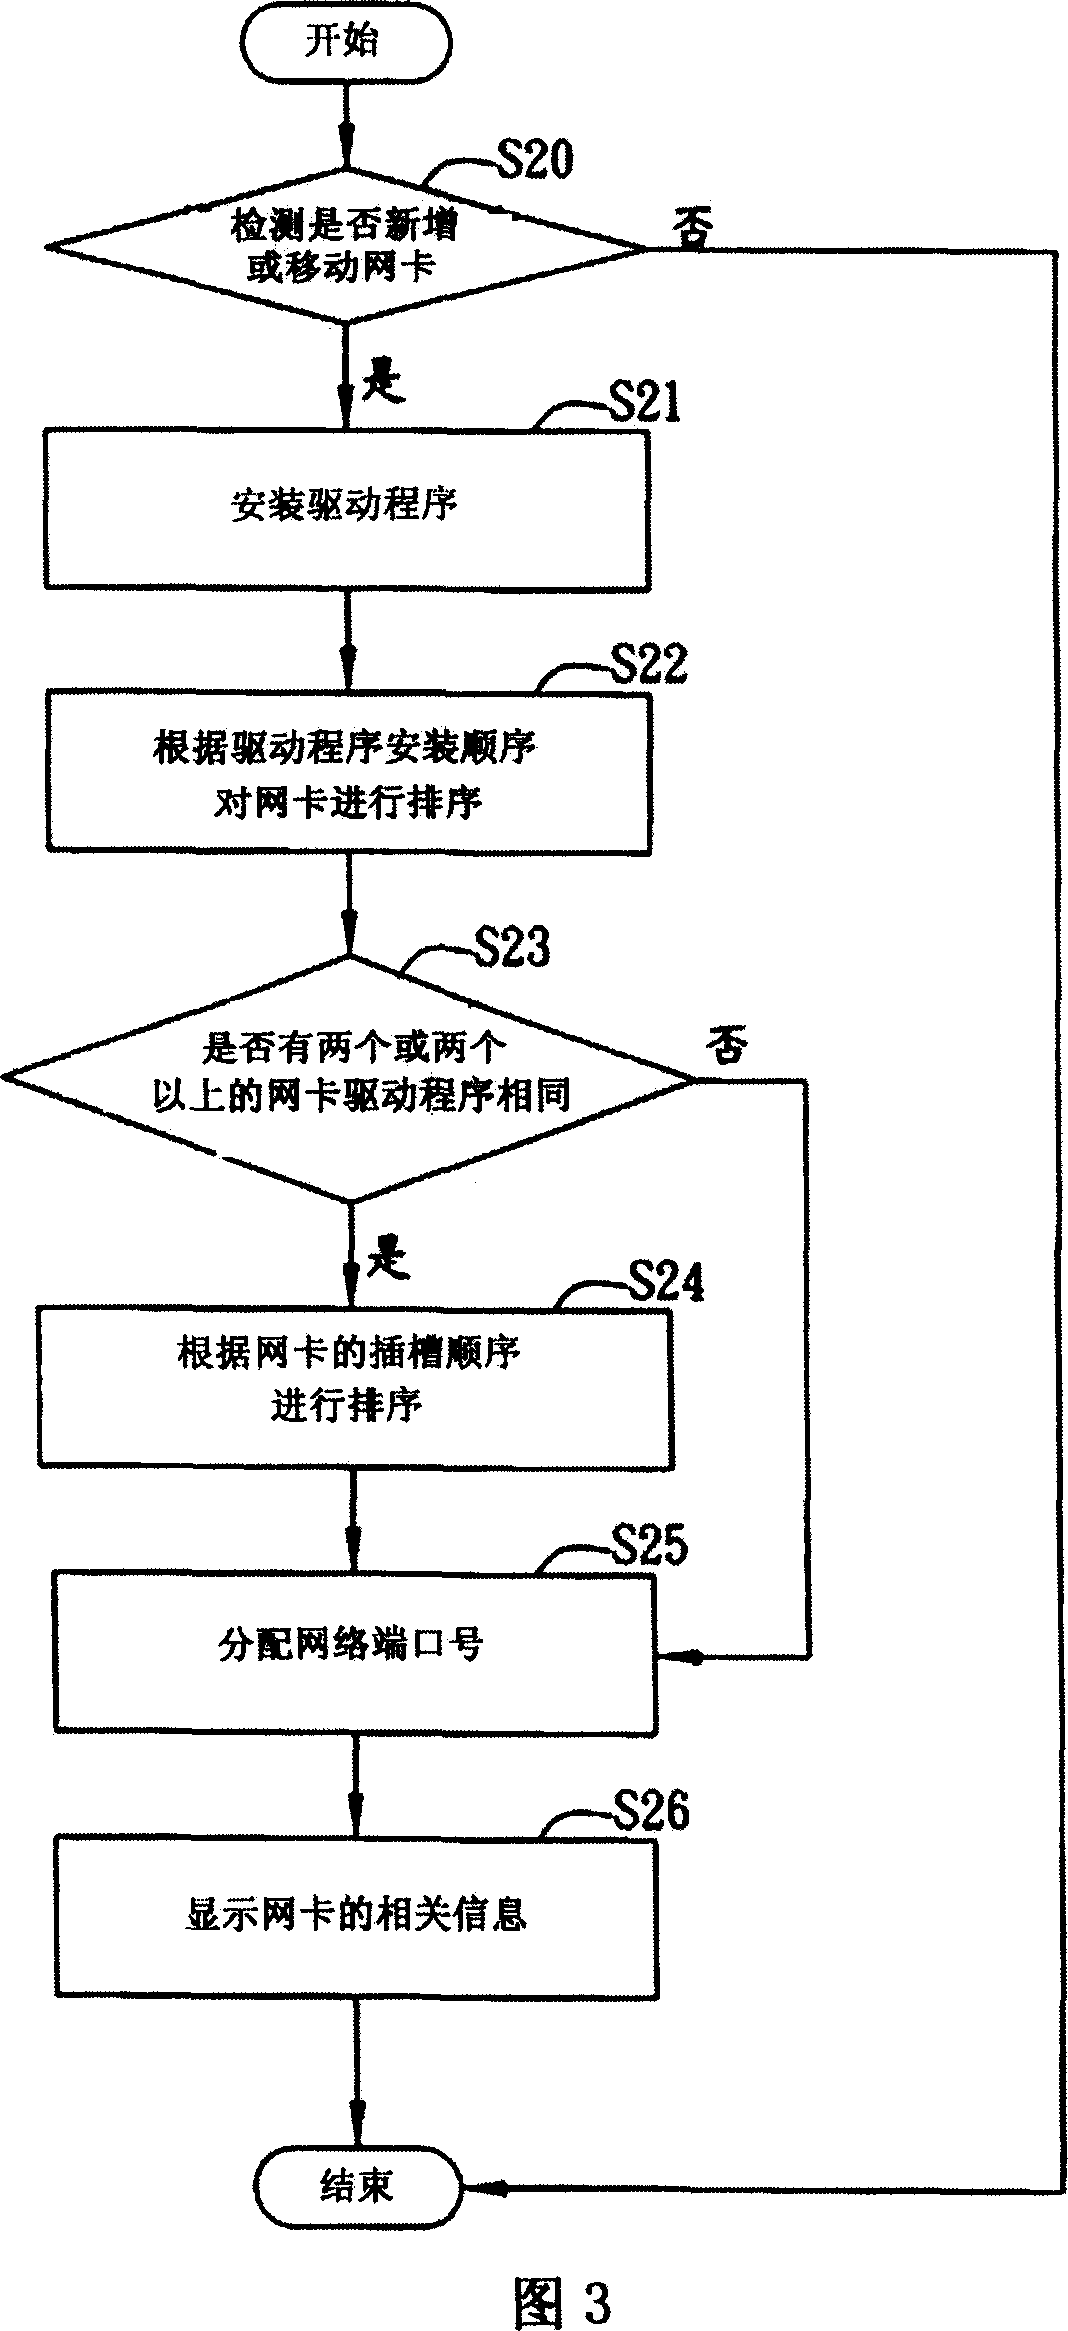 Network card automatic configuration system and method